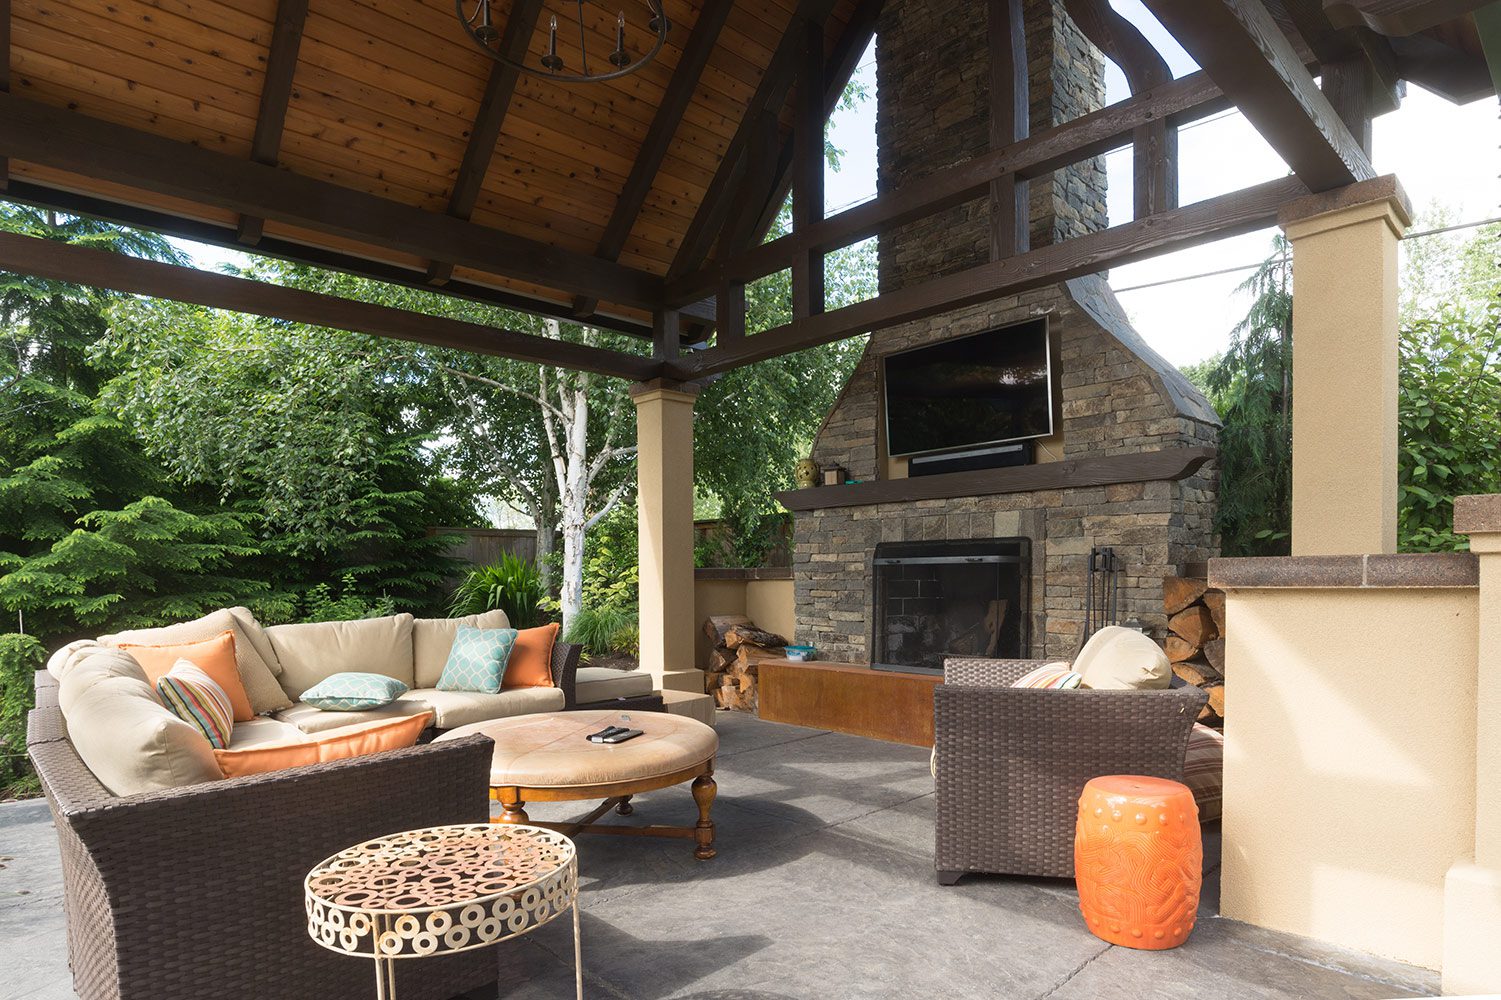 Fireplace and outdoor living area